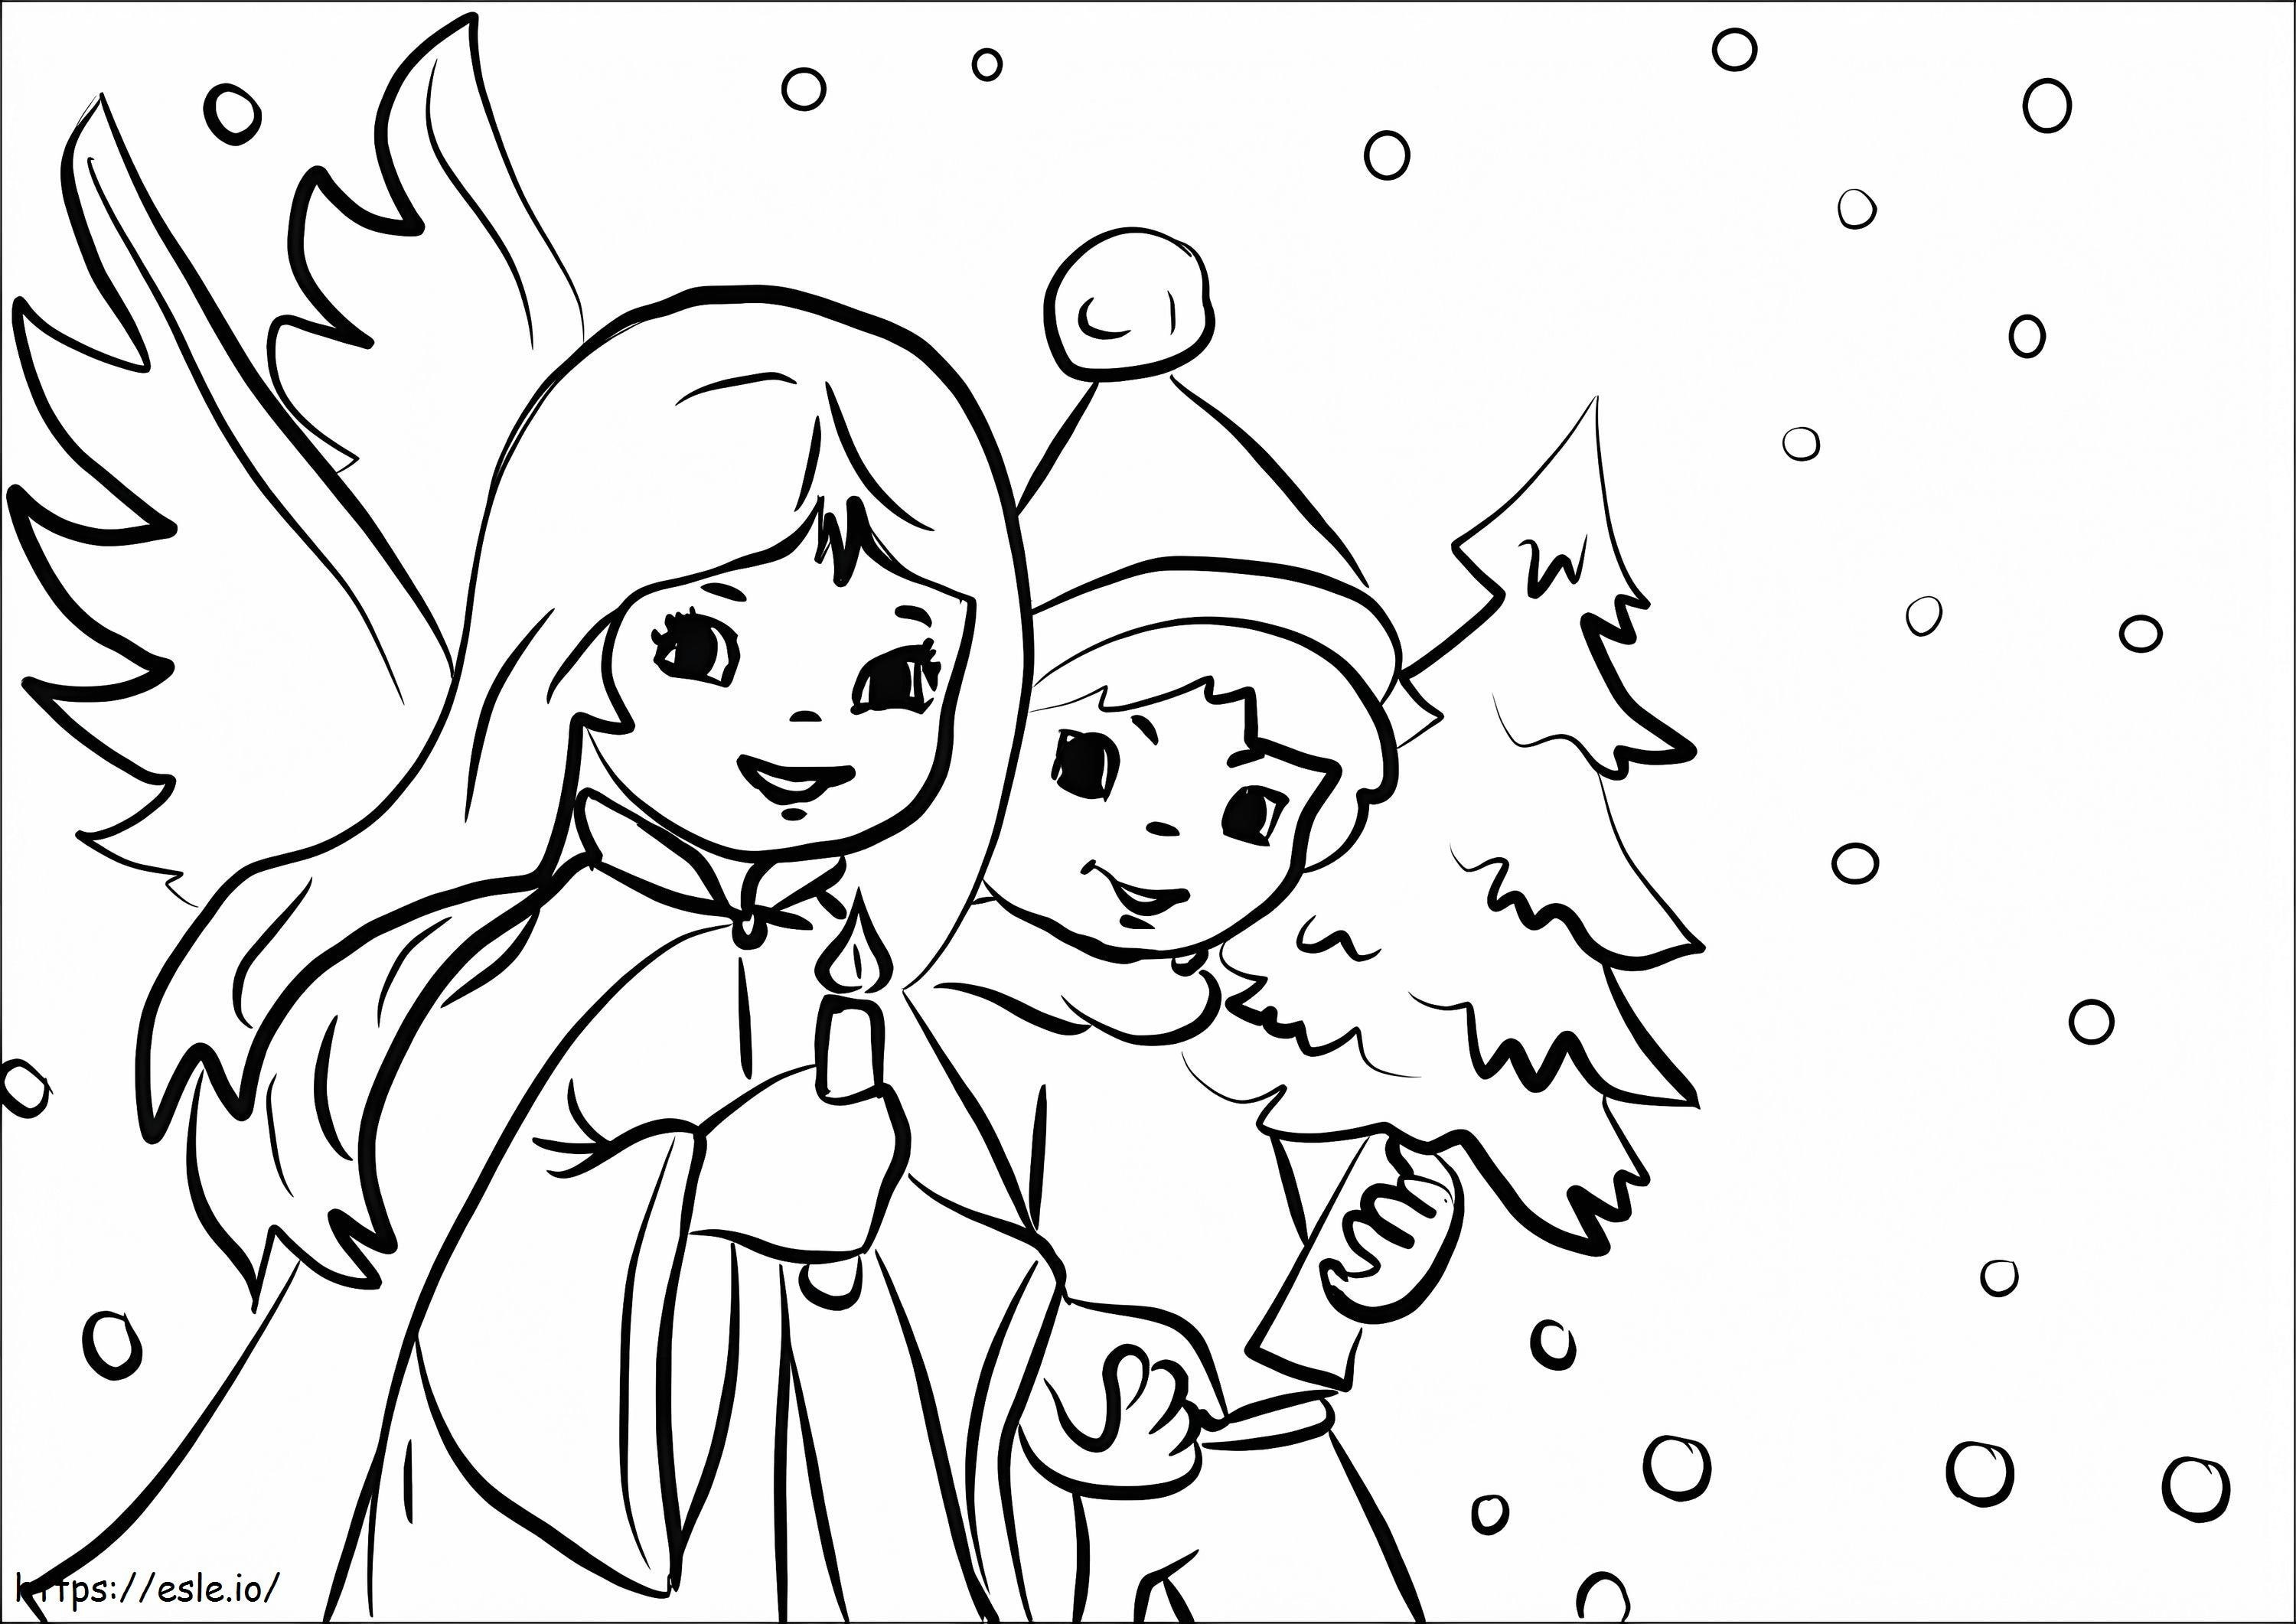 Children At Christmas In The Snow coloring page